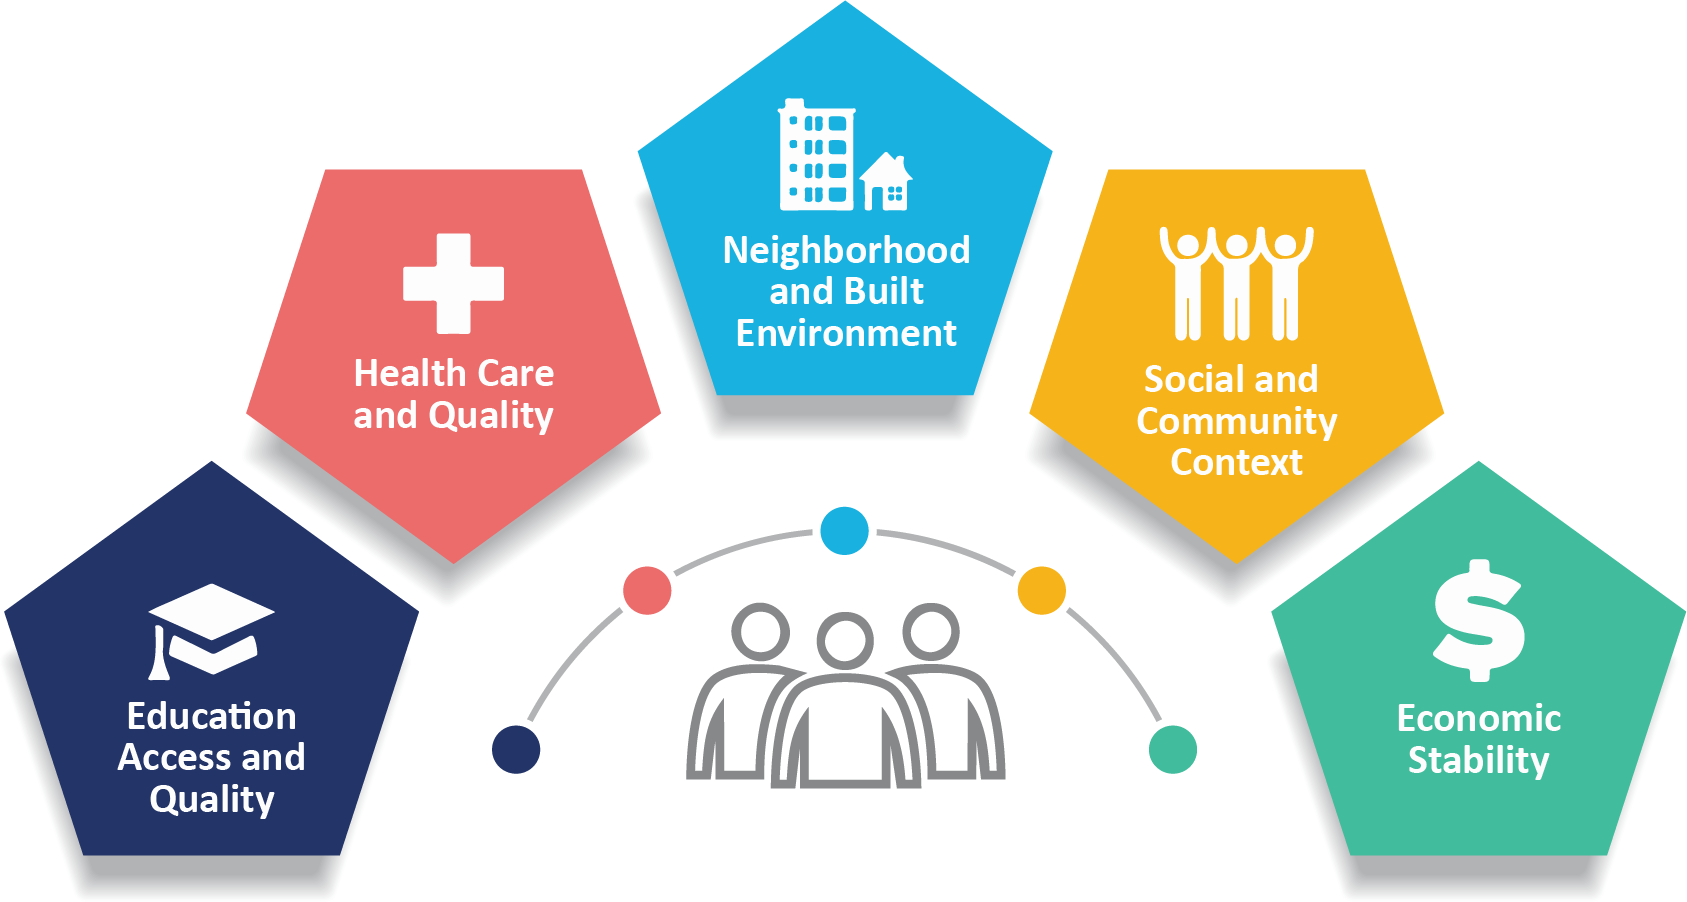 Image showing the 5 domains of the social determinants of health: 1) education access and quality, 2) healthcare access and quality, 3) neighborhood and built environment, 4) social and community context and 5) economic stability